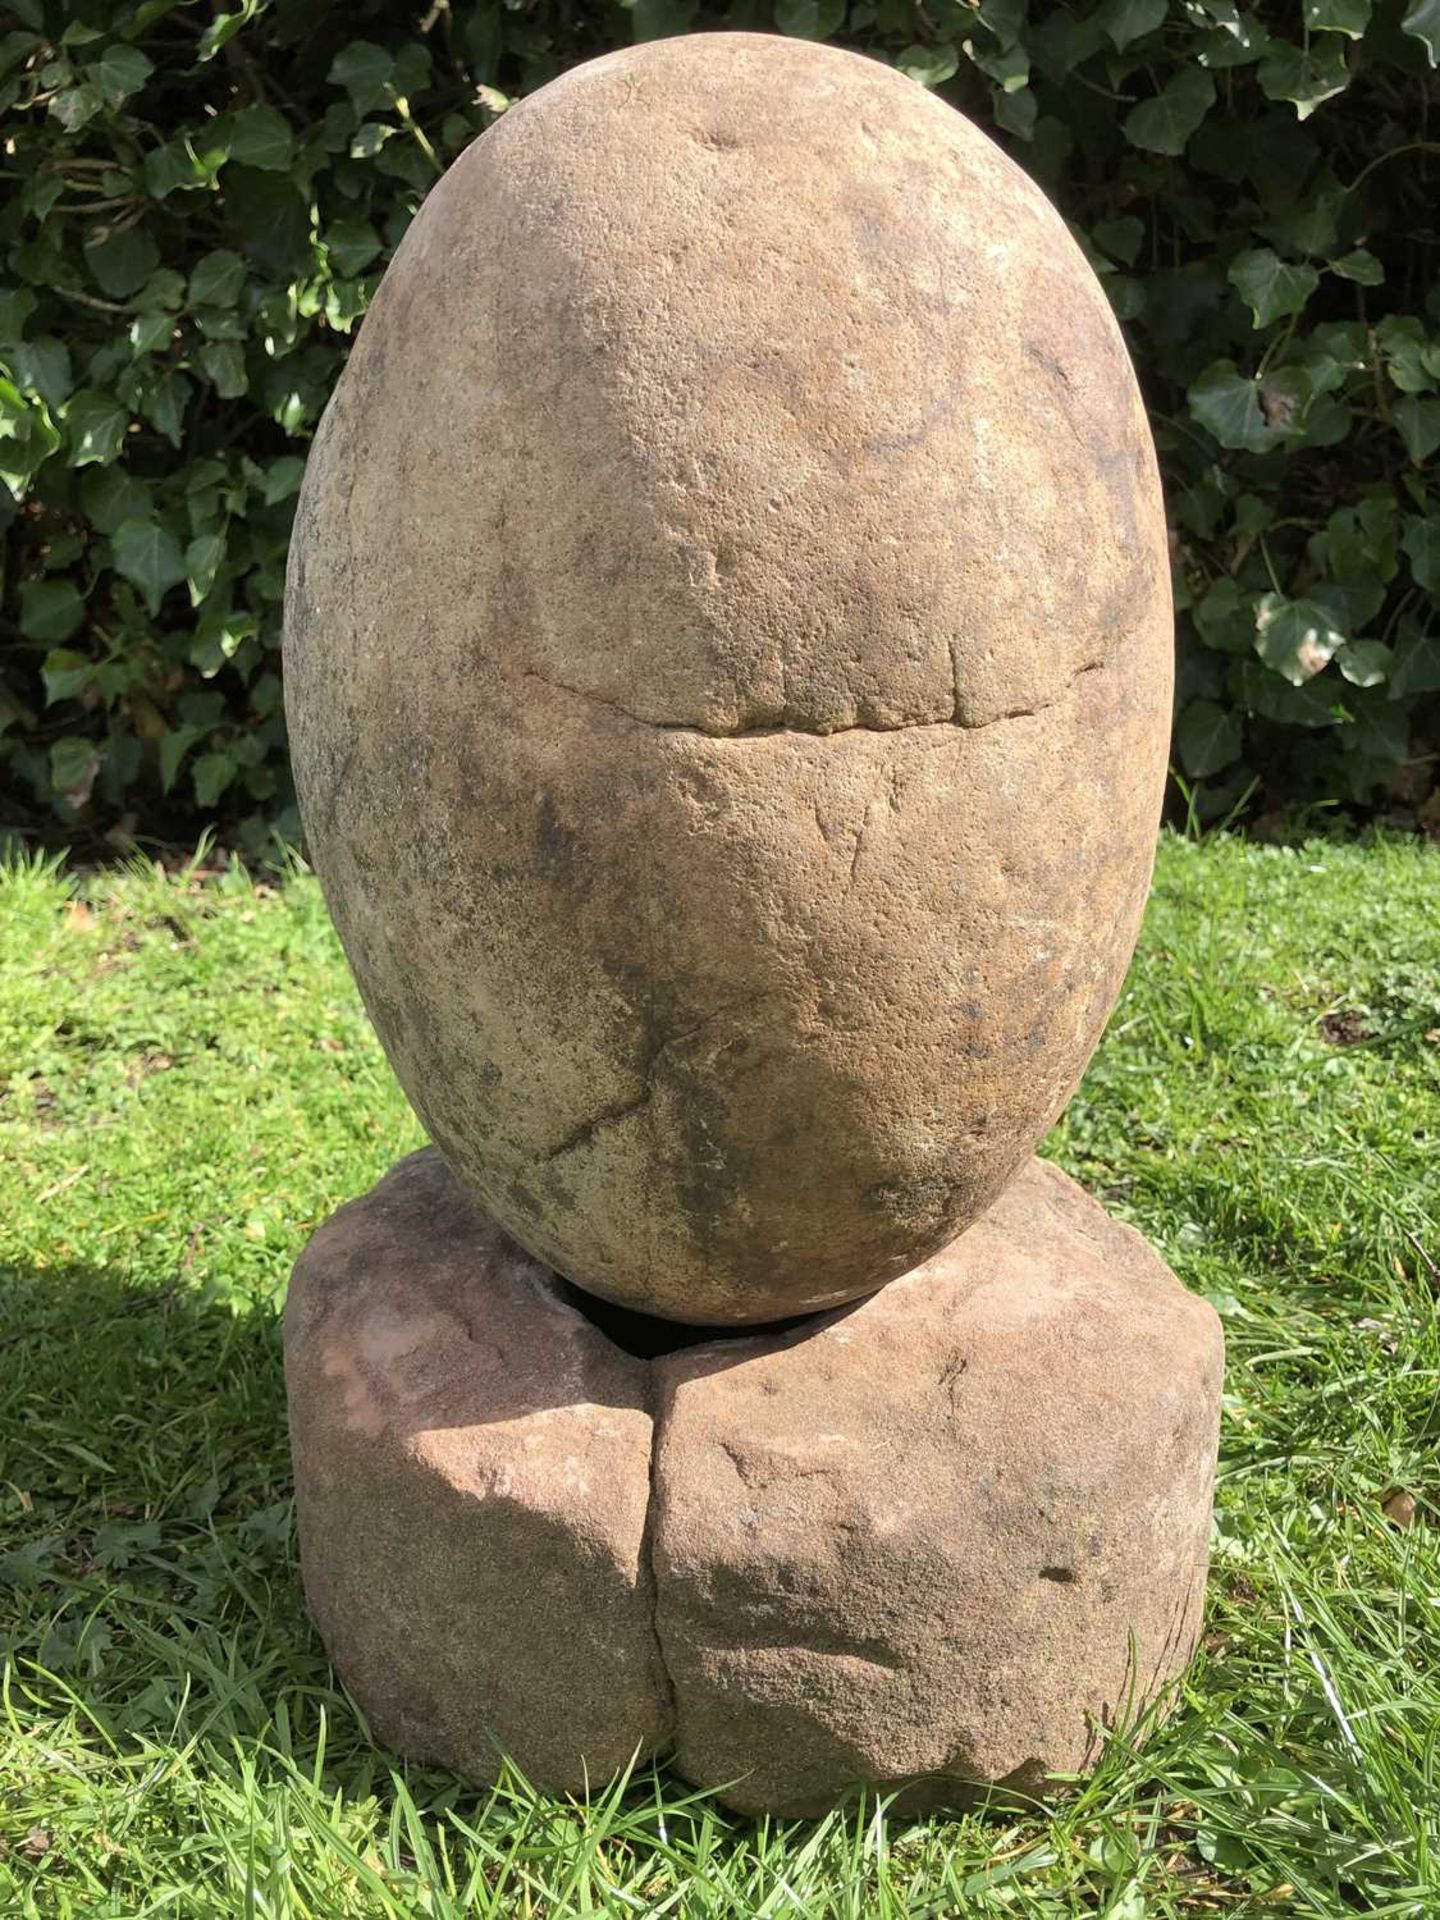 An ovoid stone sculpture on a rounded sandstone base